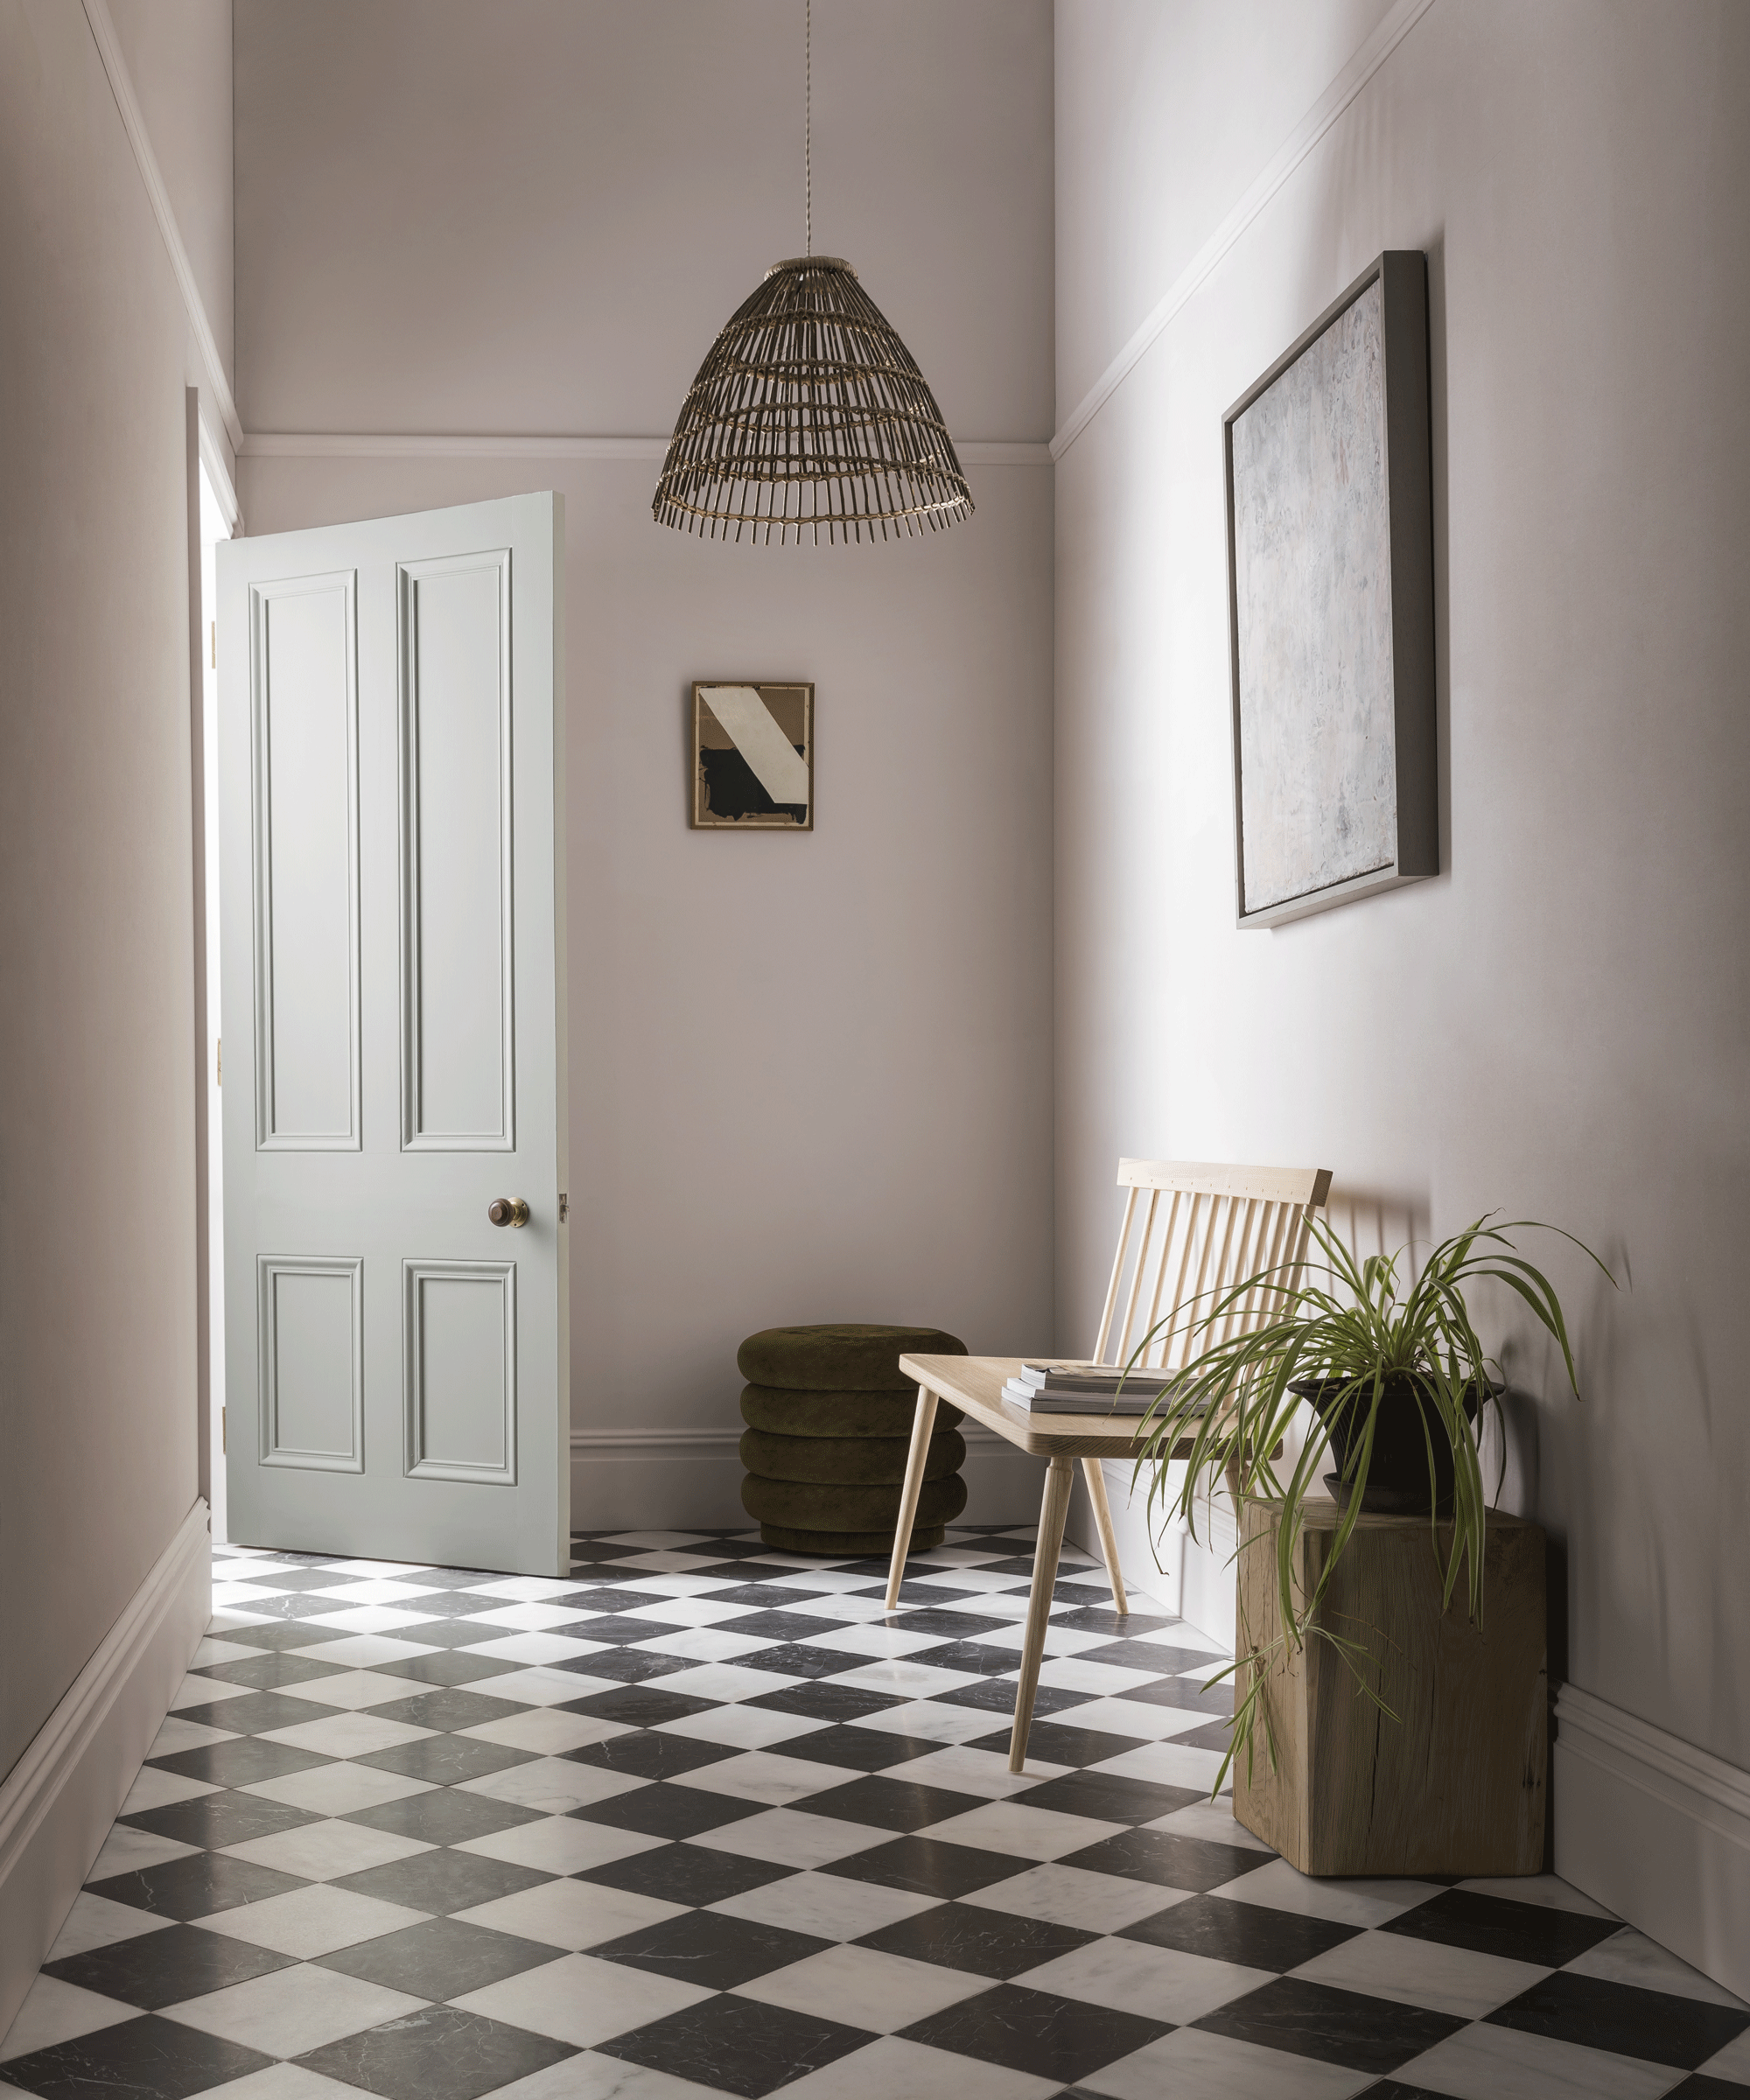 Hallway with neutral walls and chequerboard floor